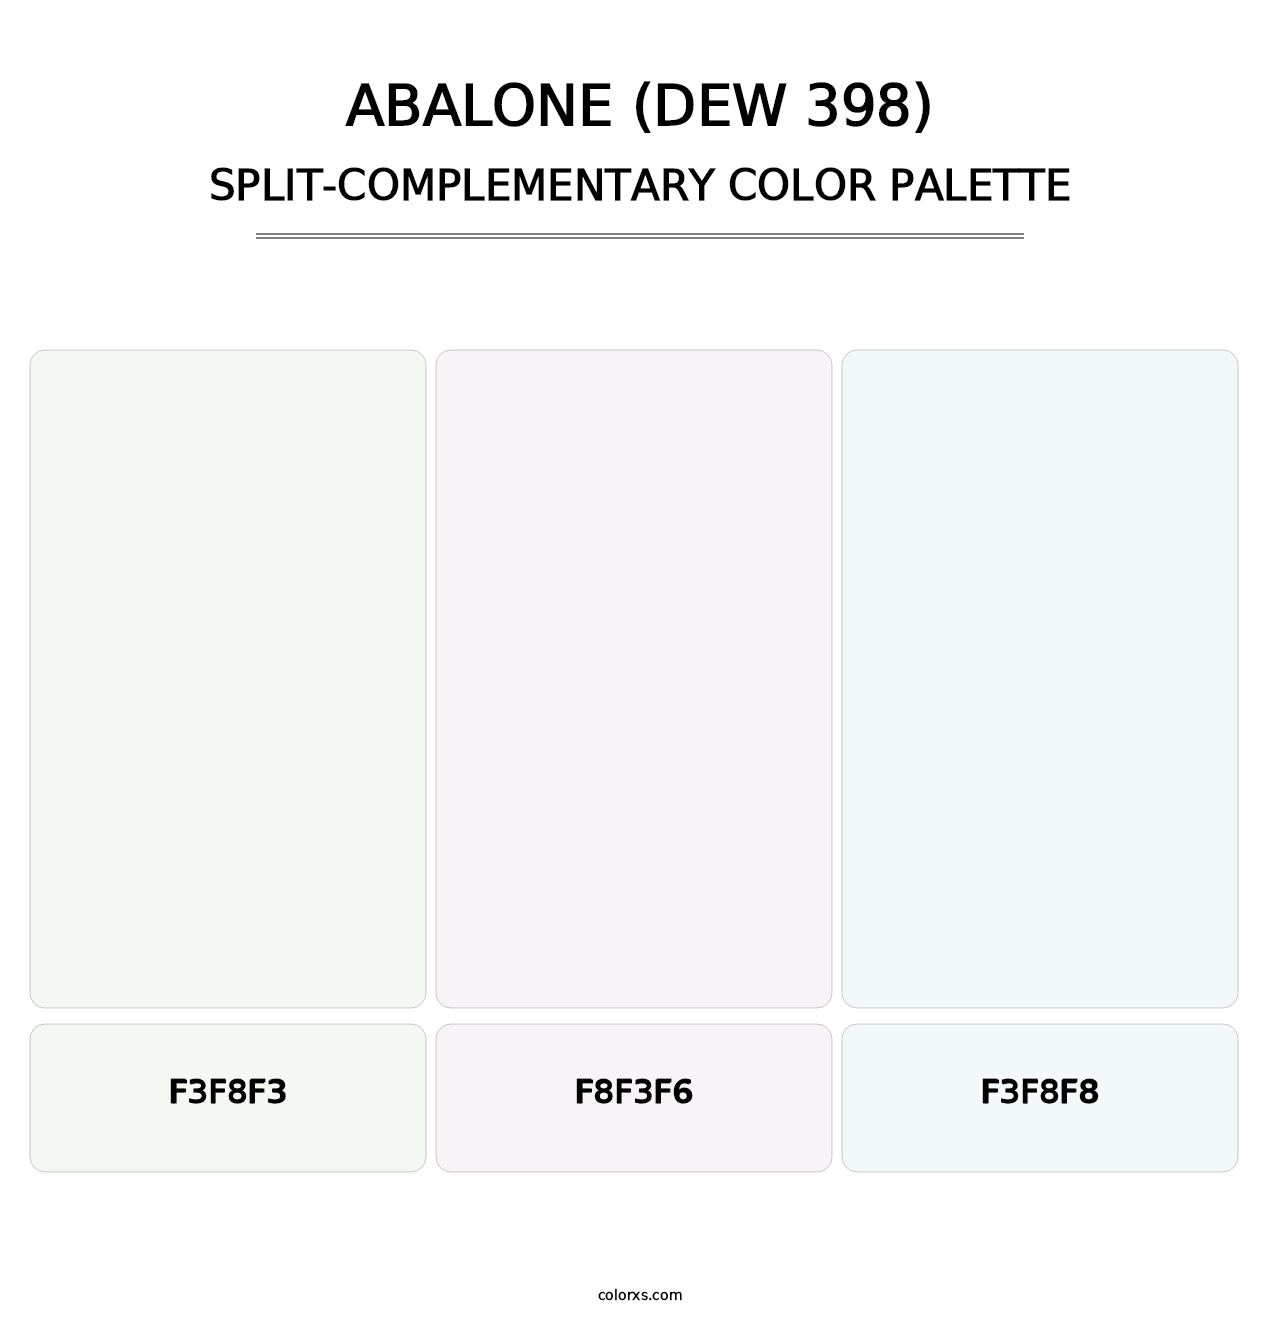 Abalone (DEW 398) - Split-Complementary Color Palette